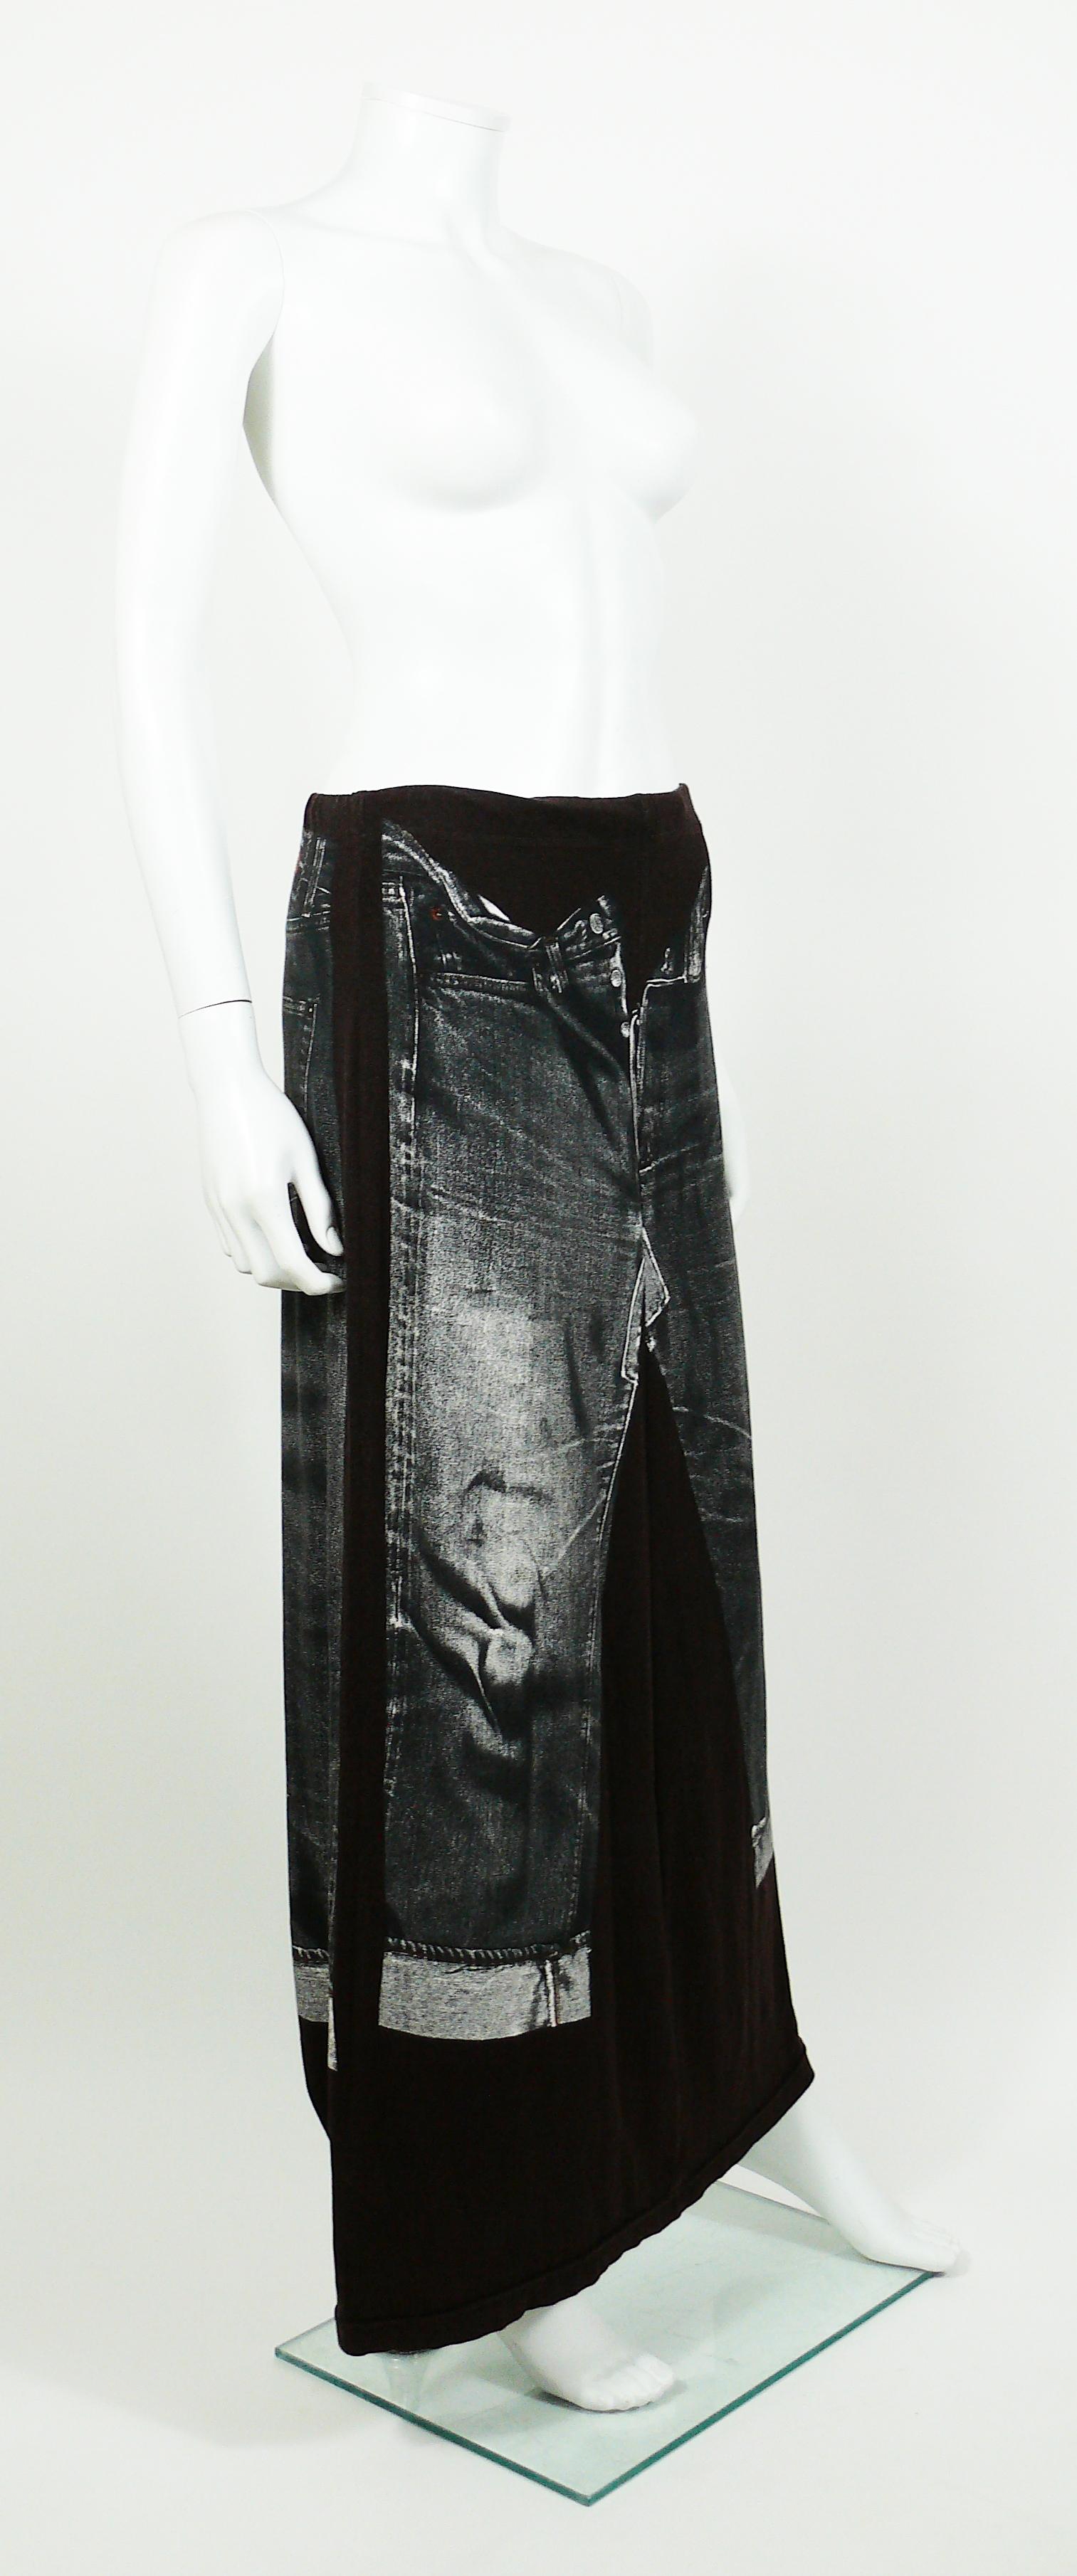 JEAN PAUL GAULTIER plum jersey maxi skirt with featuring an X-RAY screen trompe l’œil jeans on front and back.

This skirt features :
- Plum jersey background featuring distressed black/white x-ray screen trompe l’œil jeans.
- Maxi length.
-